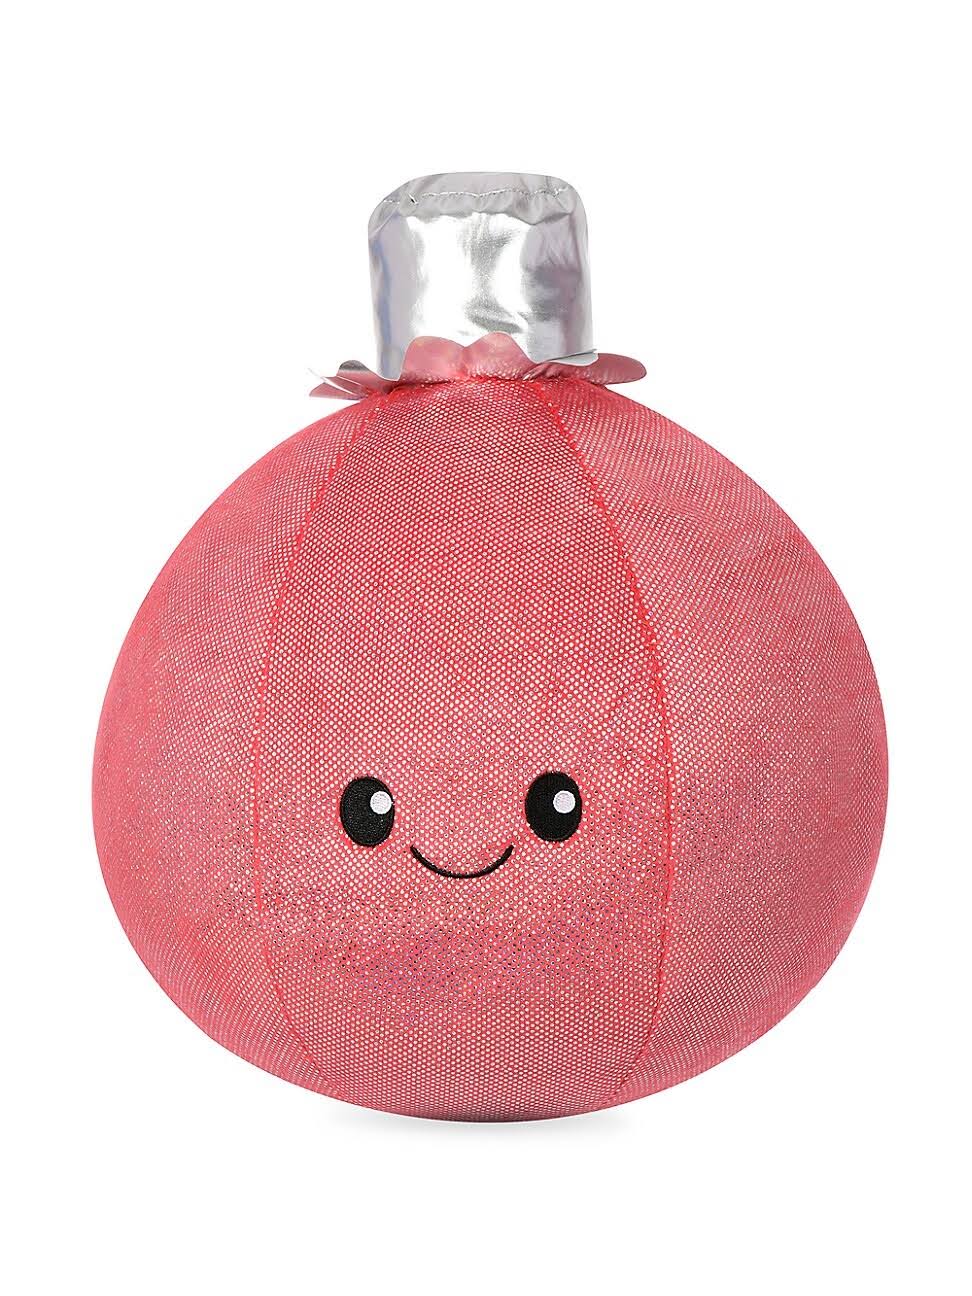 Iscream Ornament Plush Toy - Red One-Size